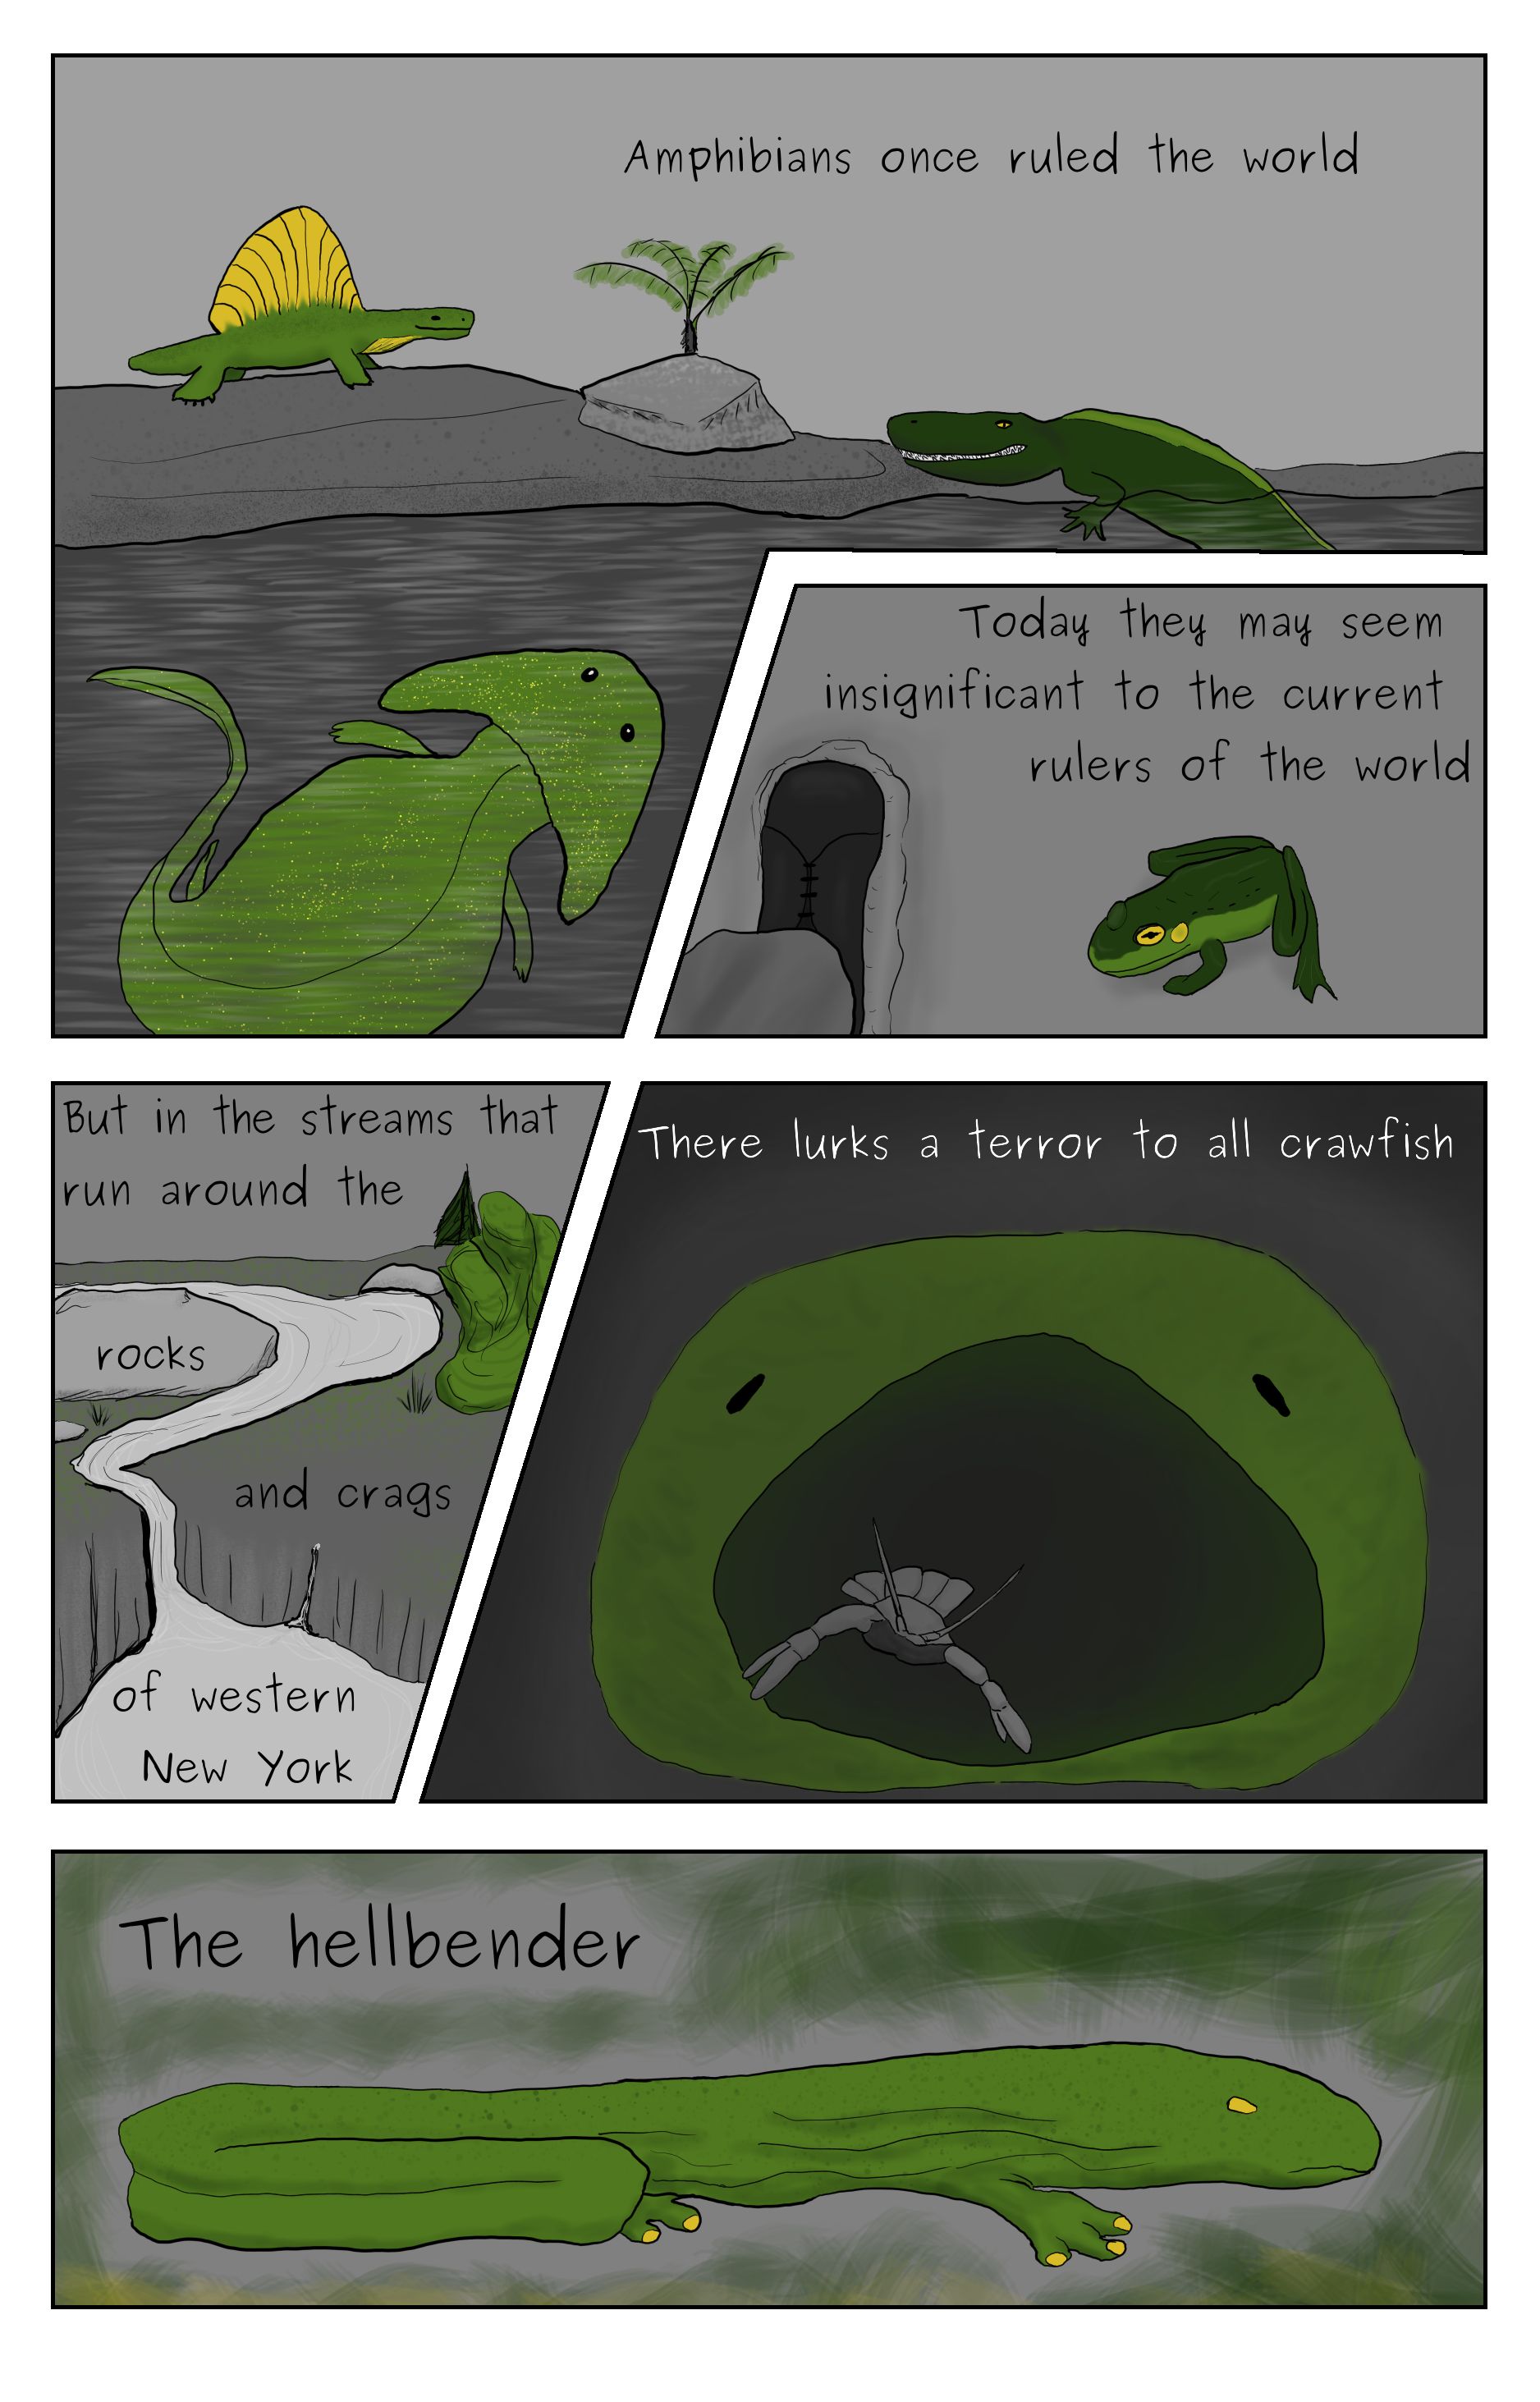 A comic featuring a scen from the permian period with the amphibians of that era, a foot next to a common green frog, a stream flowing through western New York, a crayfish fleeing a gaping maw, and a hellbender salamander.